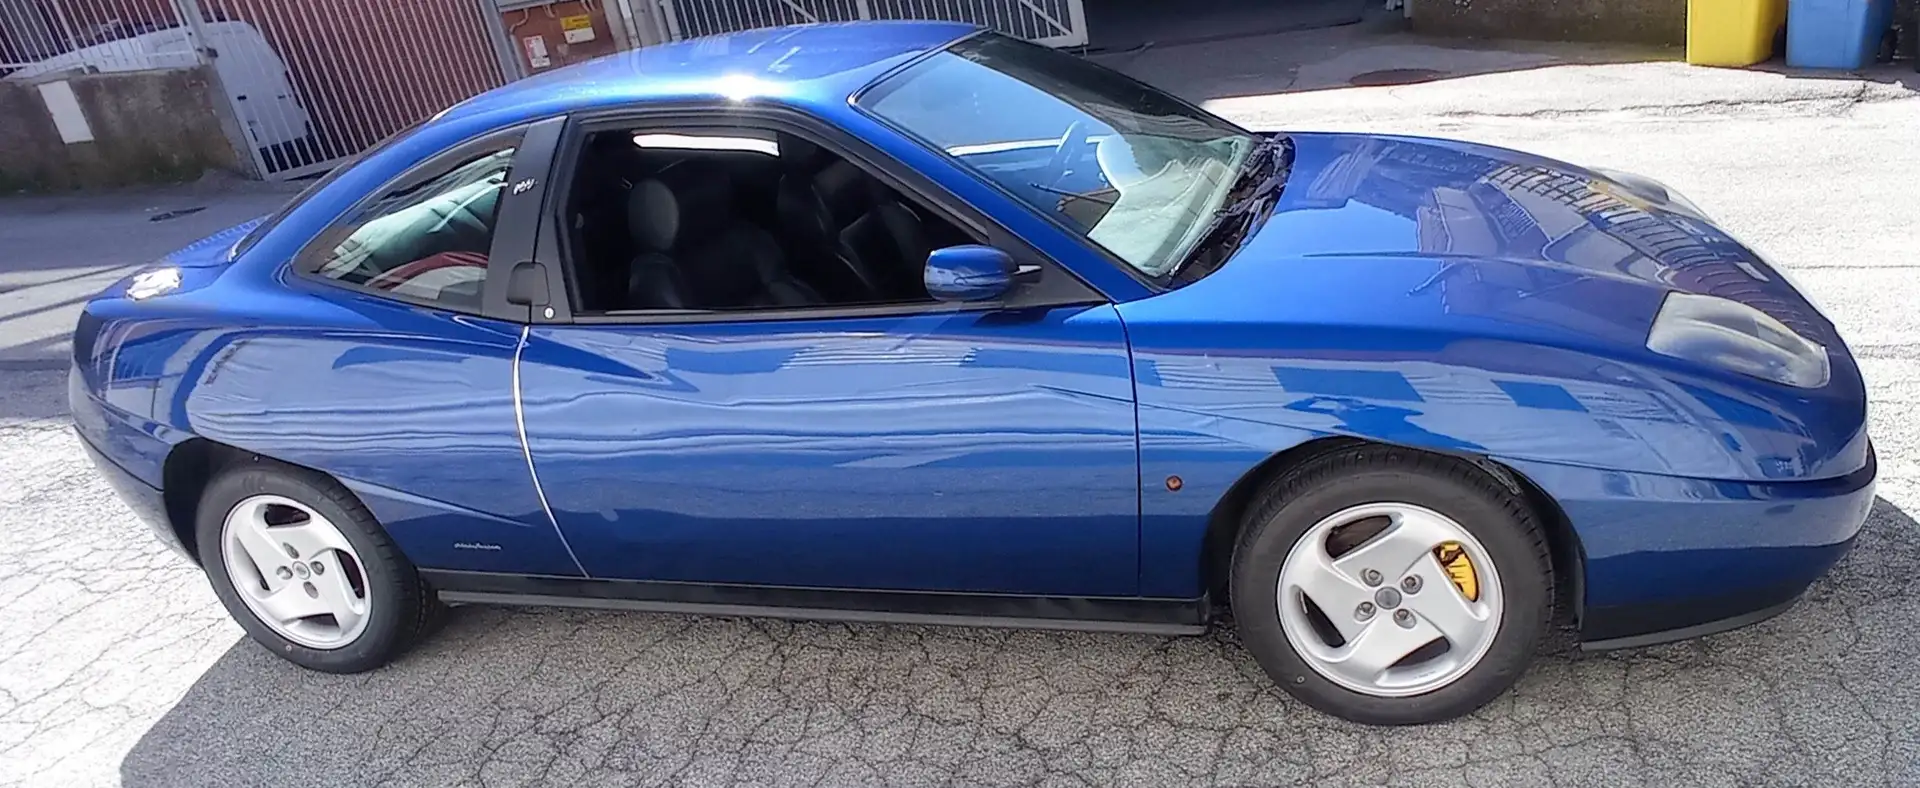 Fiat Coupe Coupe 2.0 16v c/airbag Azul - 2